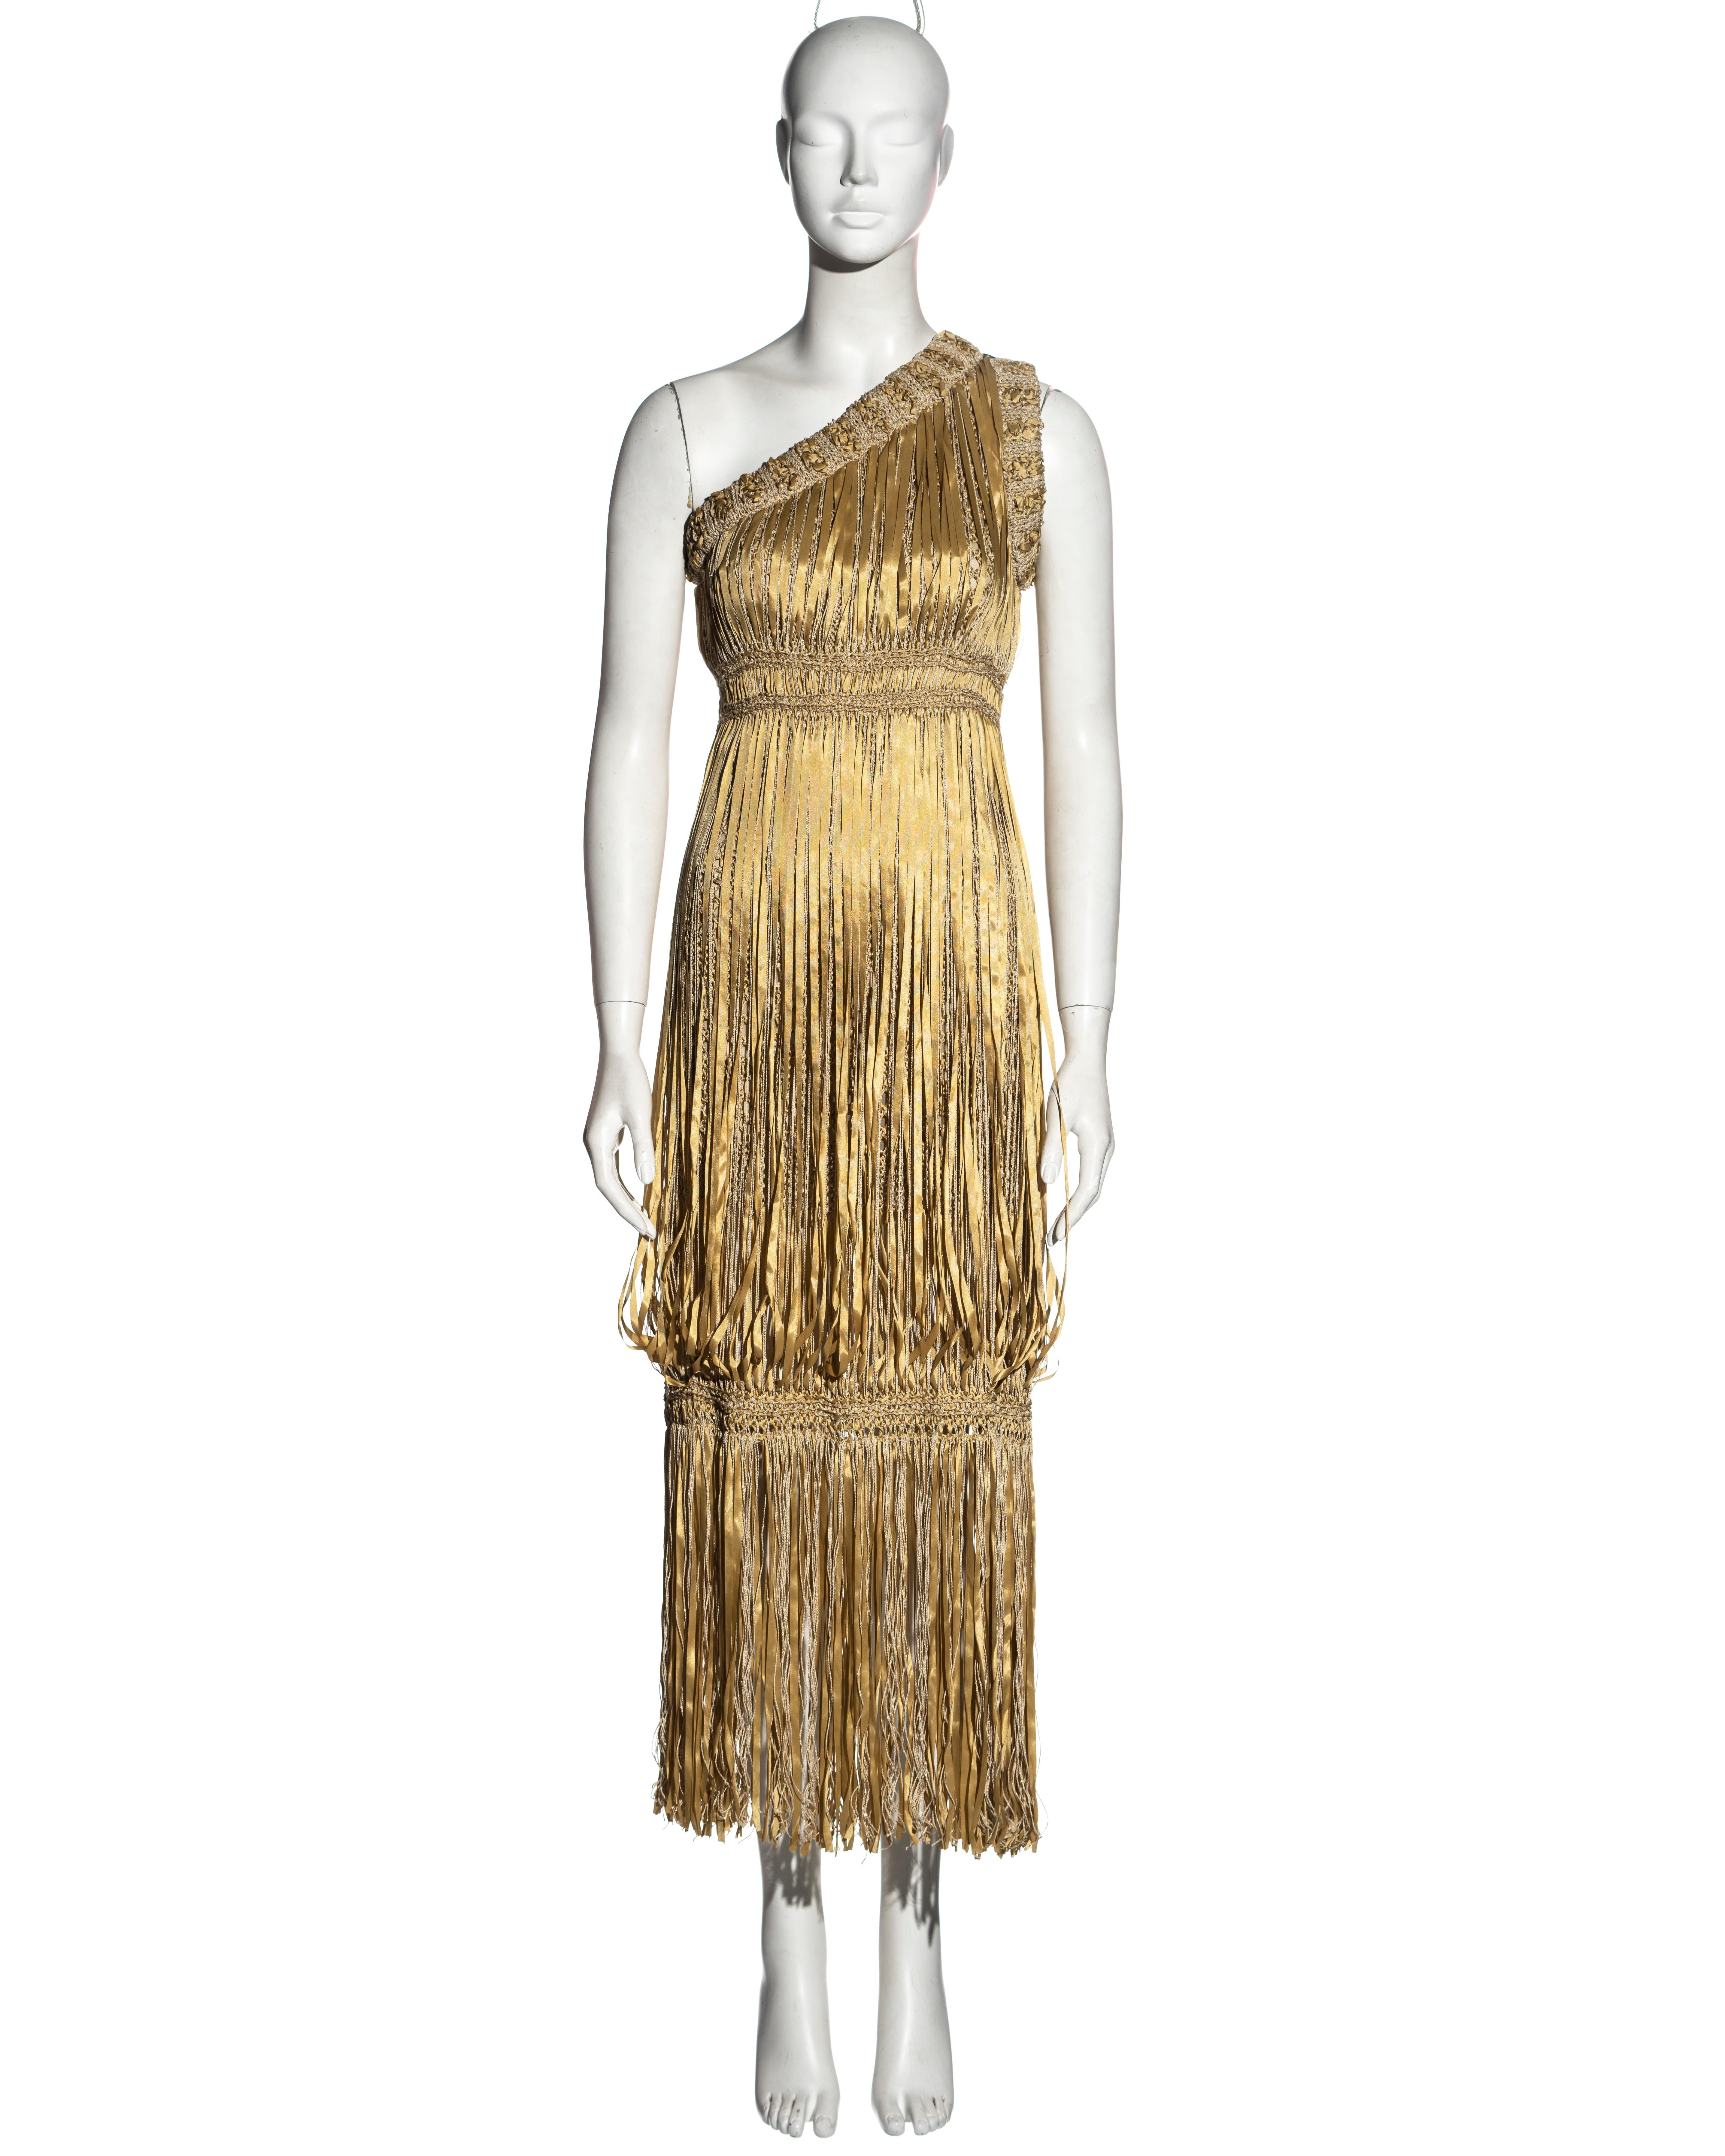 ▪ Chanel straw crochet and ribbon dress
▪ Designed by Karl Lagerfeld 
▪ One-shoulder 
▪ Metallic crochet woven with ribbons 
▪ Ankle-length skirt 
▪ Chiffon lining 
▪ Gold-tone Chanel buttons 
▪ FR 36 - UK 8 - US 4
▪ Spring-Summer / Resort 2011 
▪